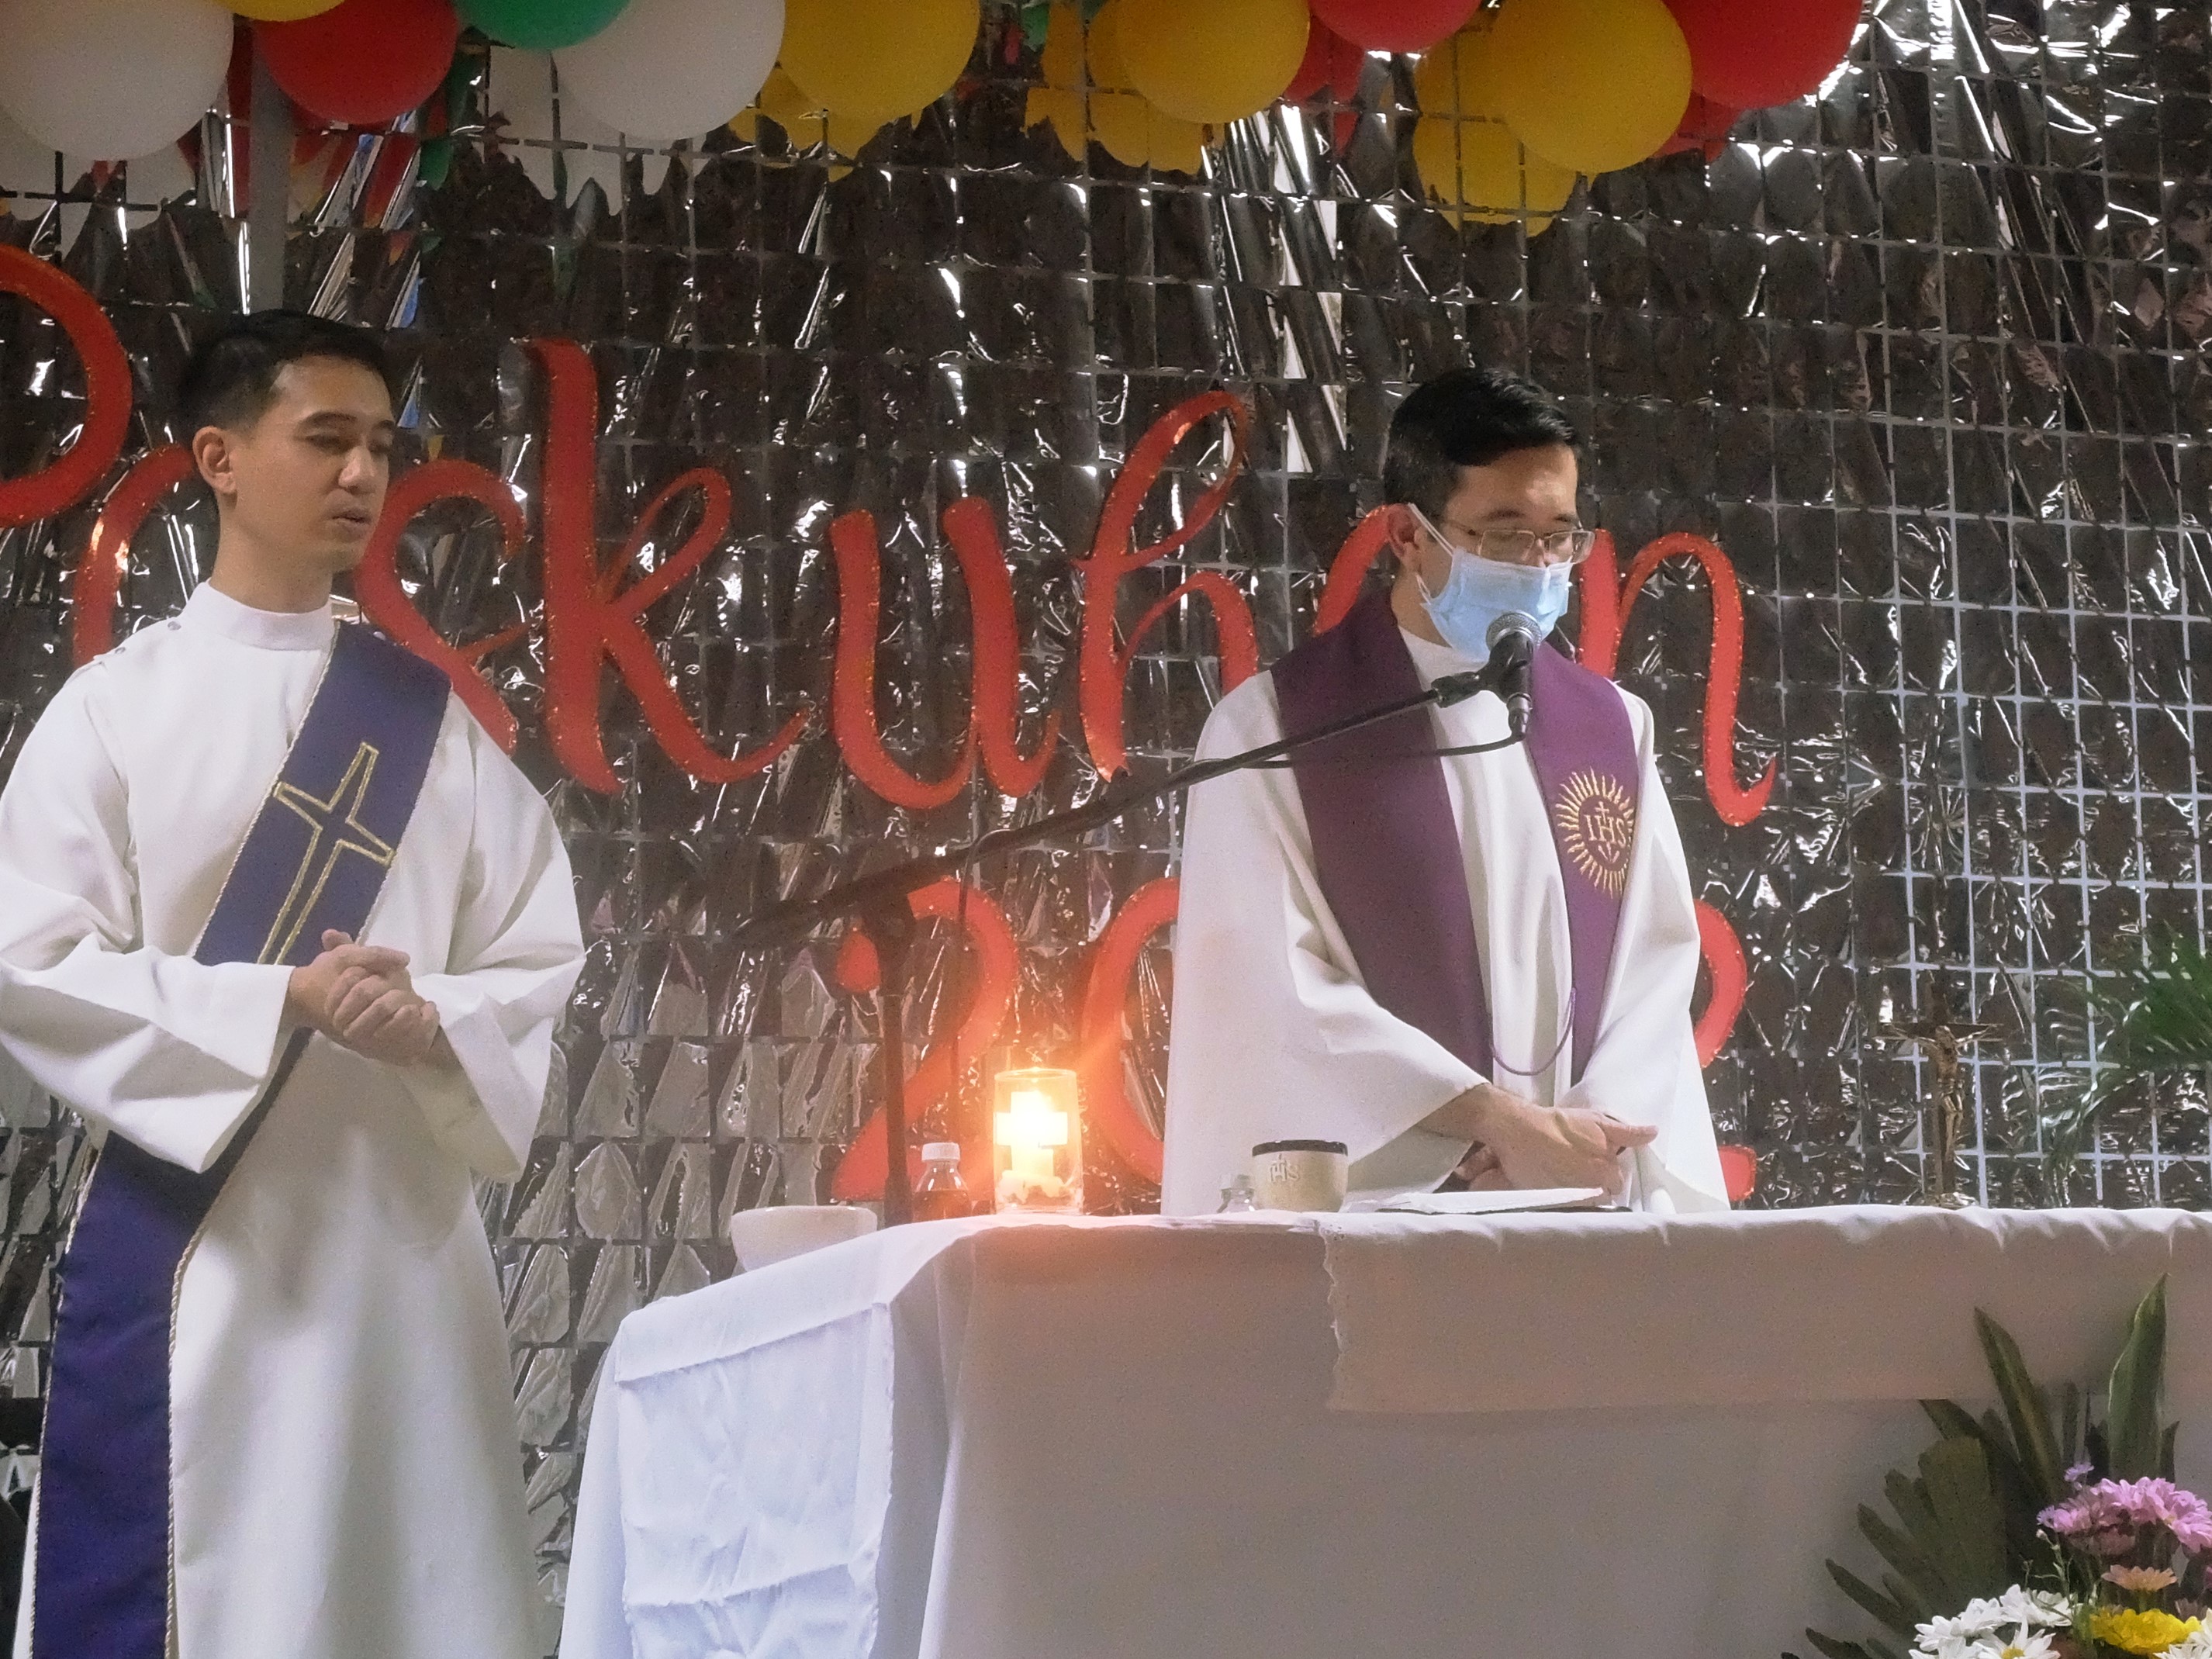 A Catholic deacon with a purple sash stands in attention to a Catholic priest in a purple stole. The priest is looking down at the altar.